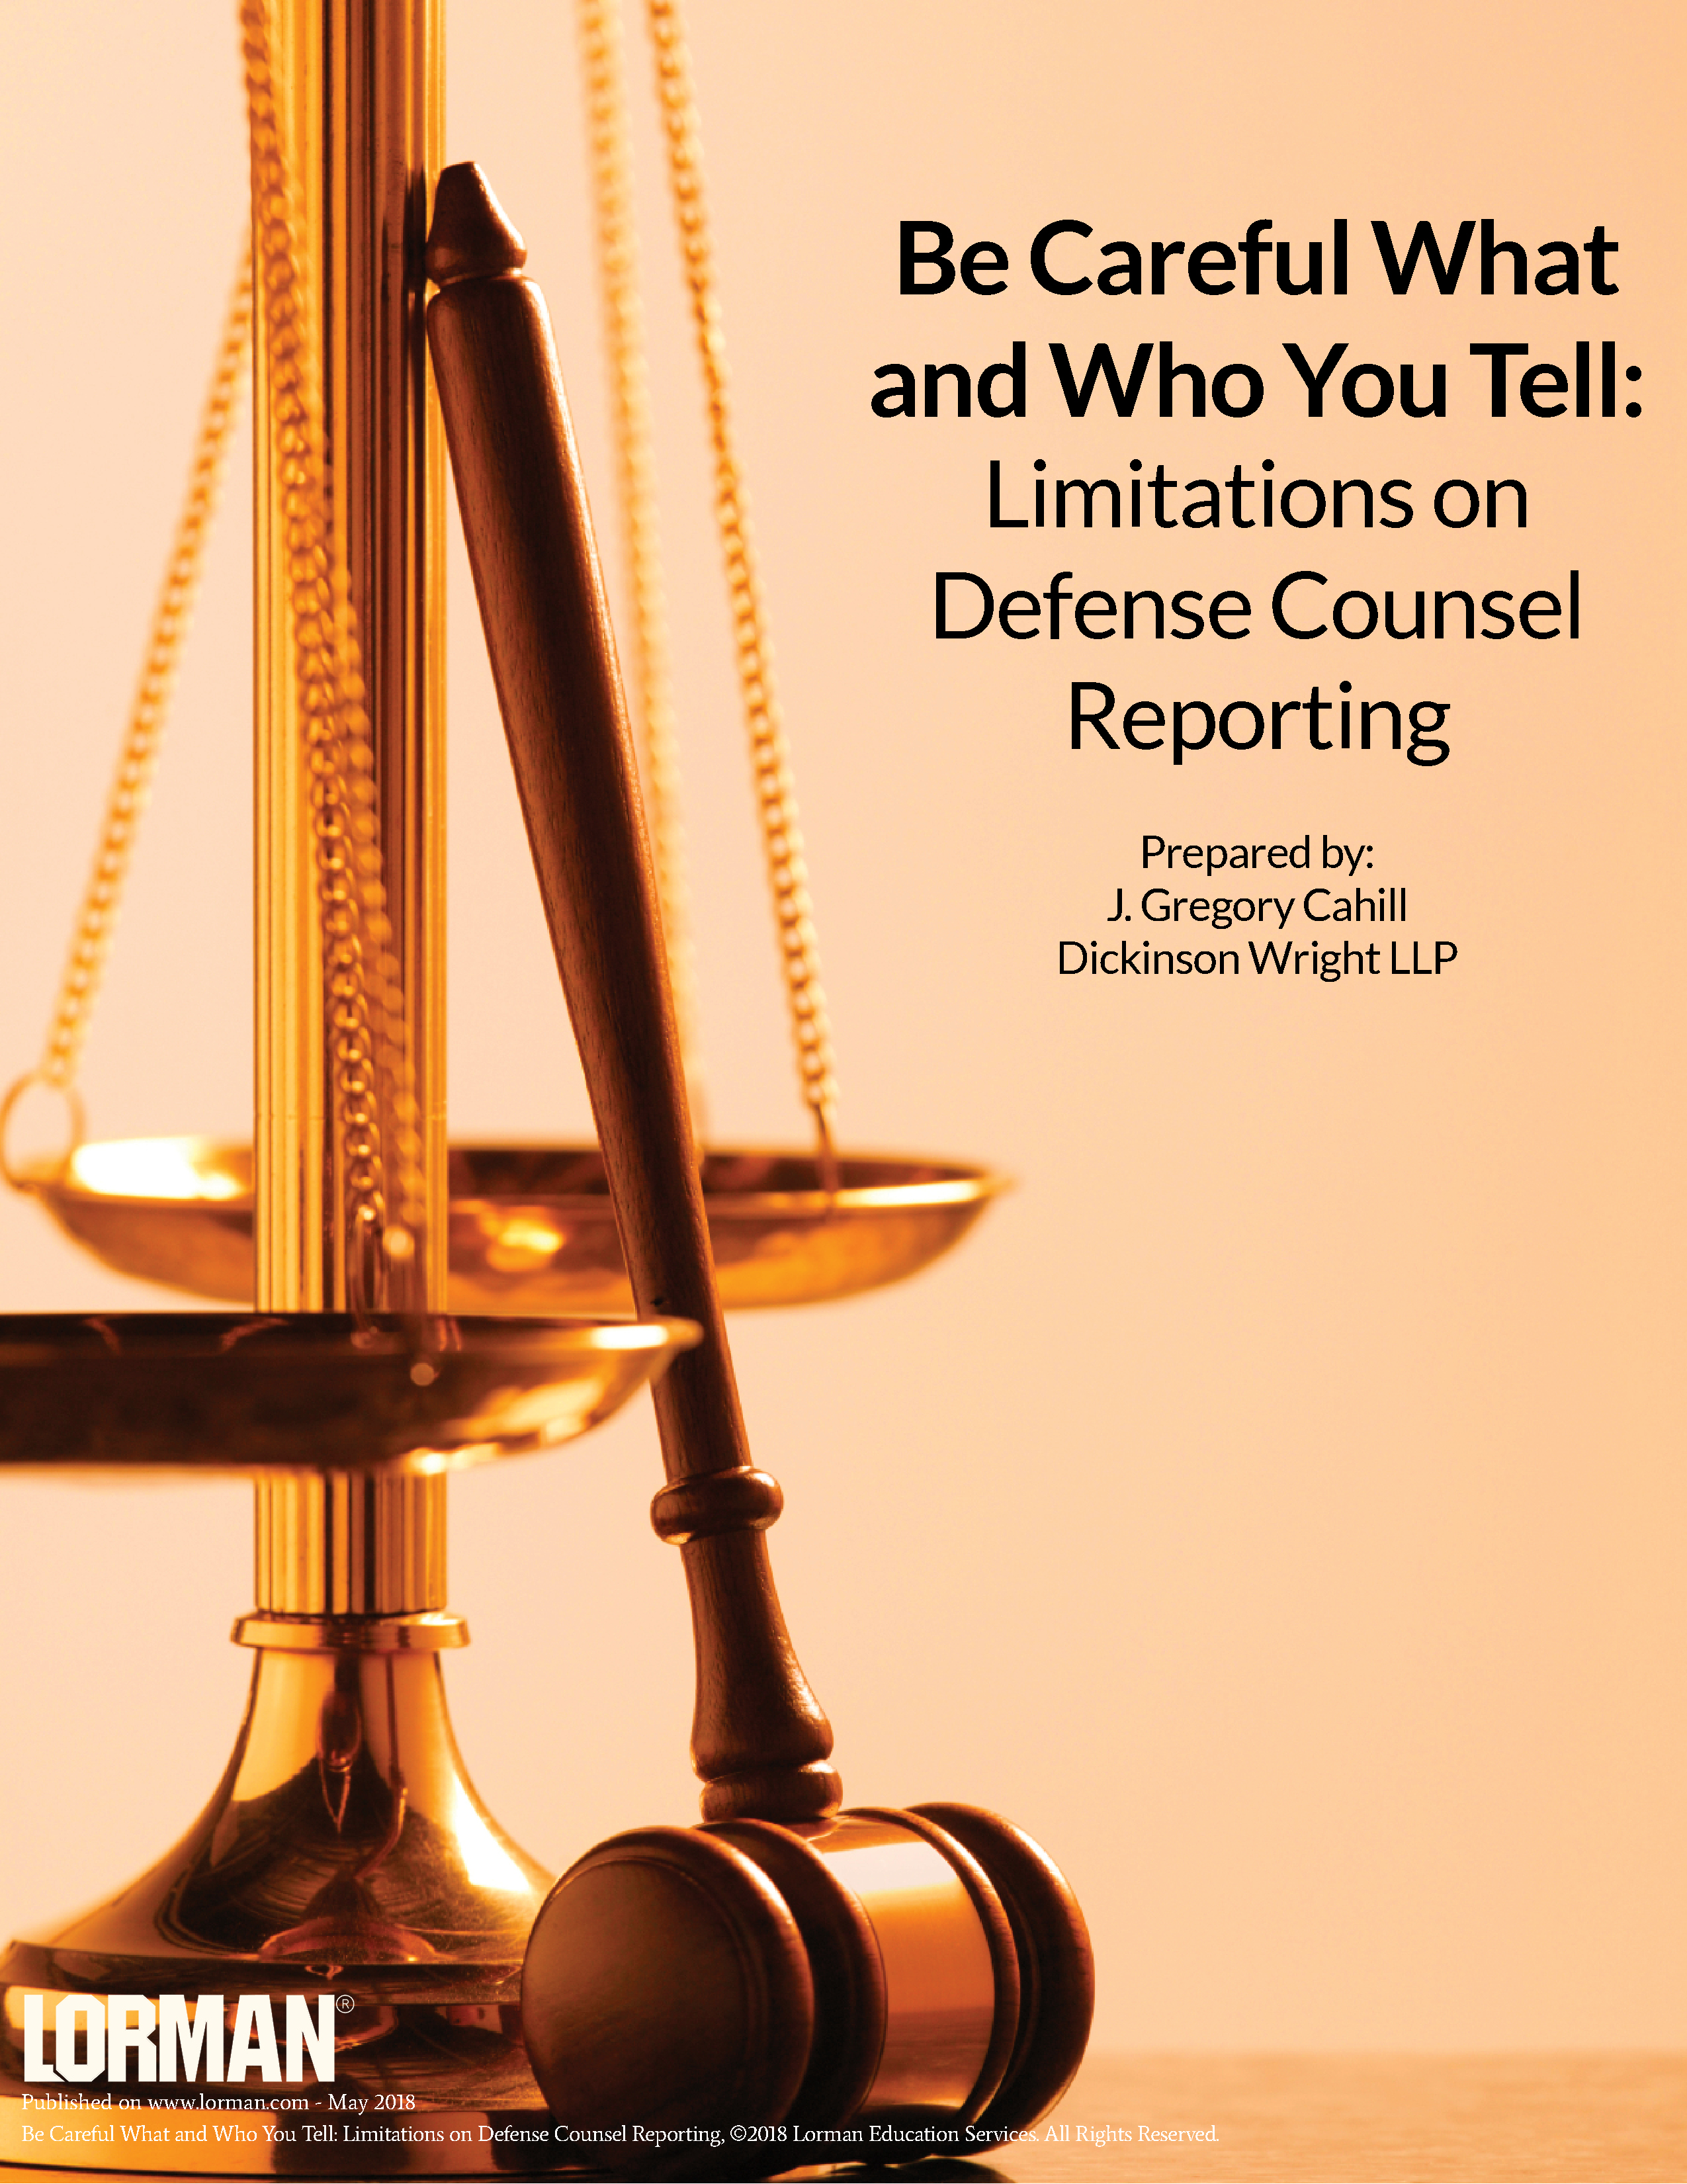 Be Careful What and Who You Tell: Limitations on Defense Counsel Reporting